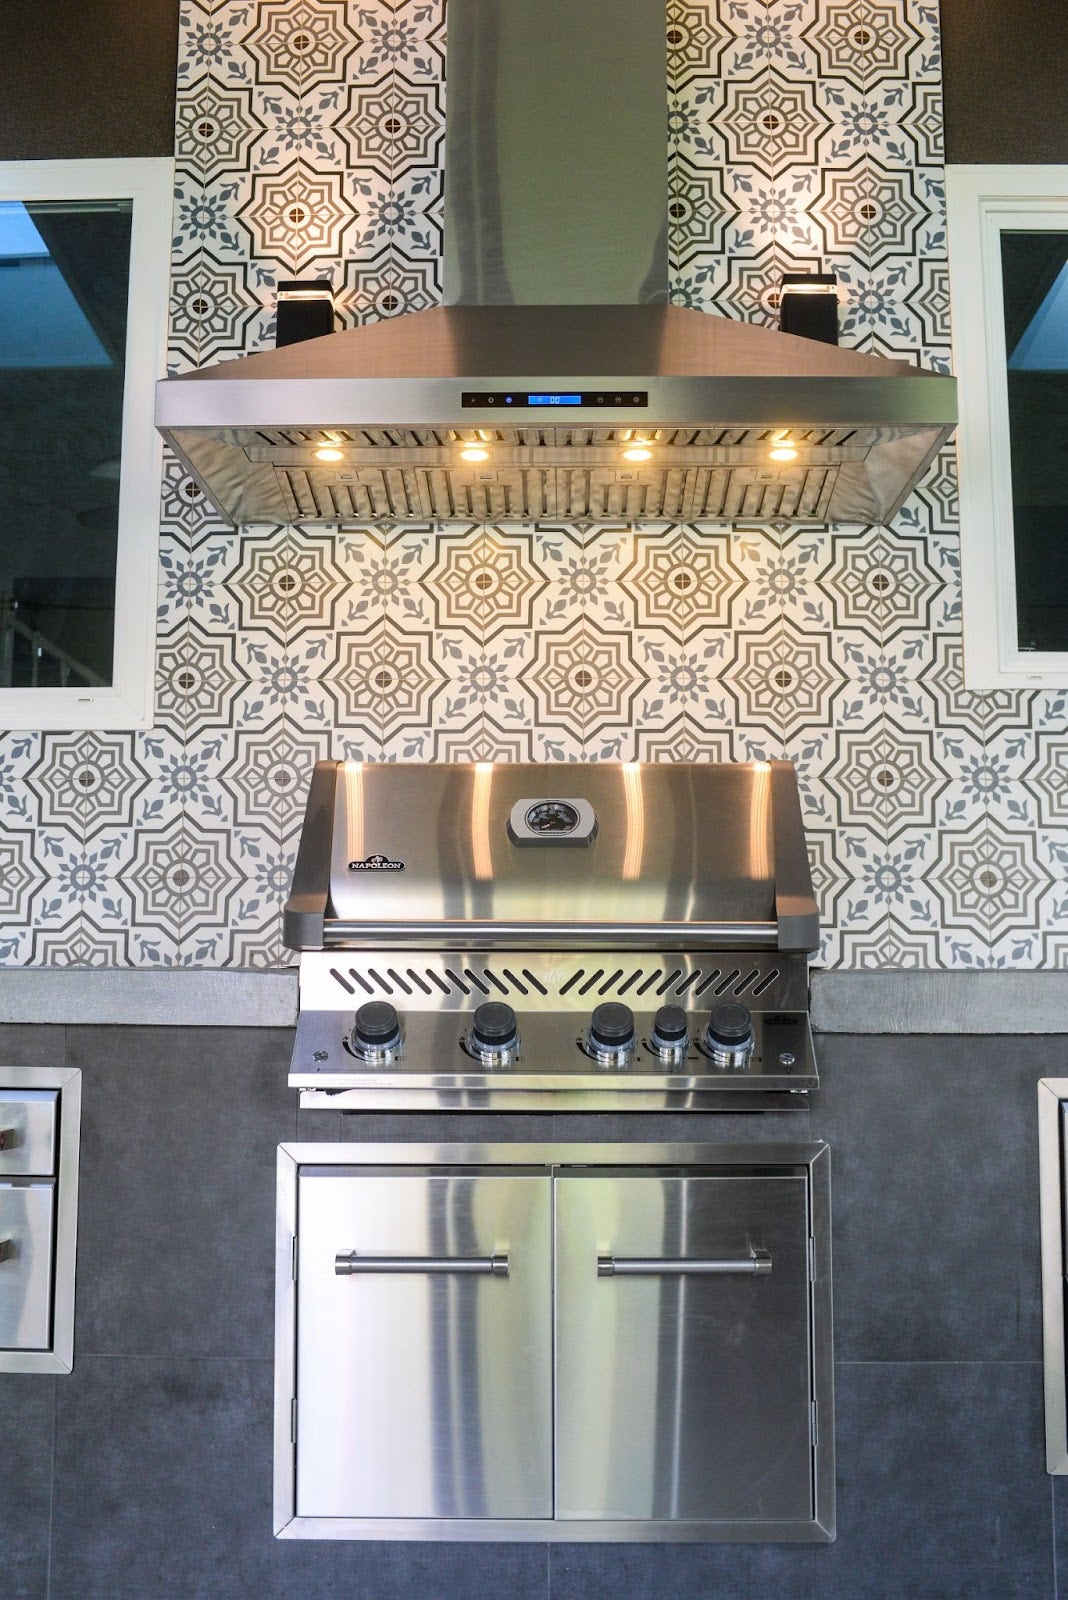 Striking Proline range hood over a stainless steel grill, showcased in a modern outdoor kitchen with intricate patterned wall tiles - prolinerangehoods.com.